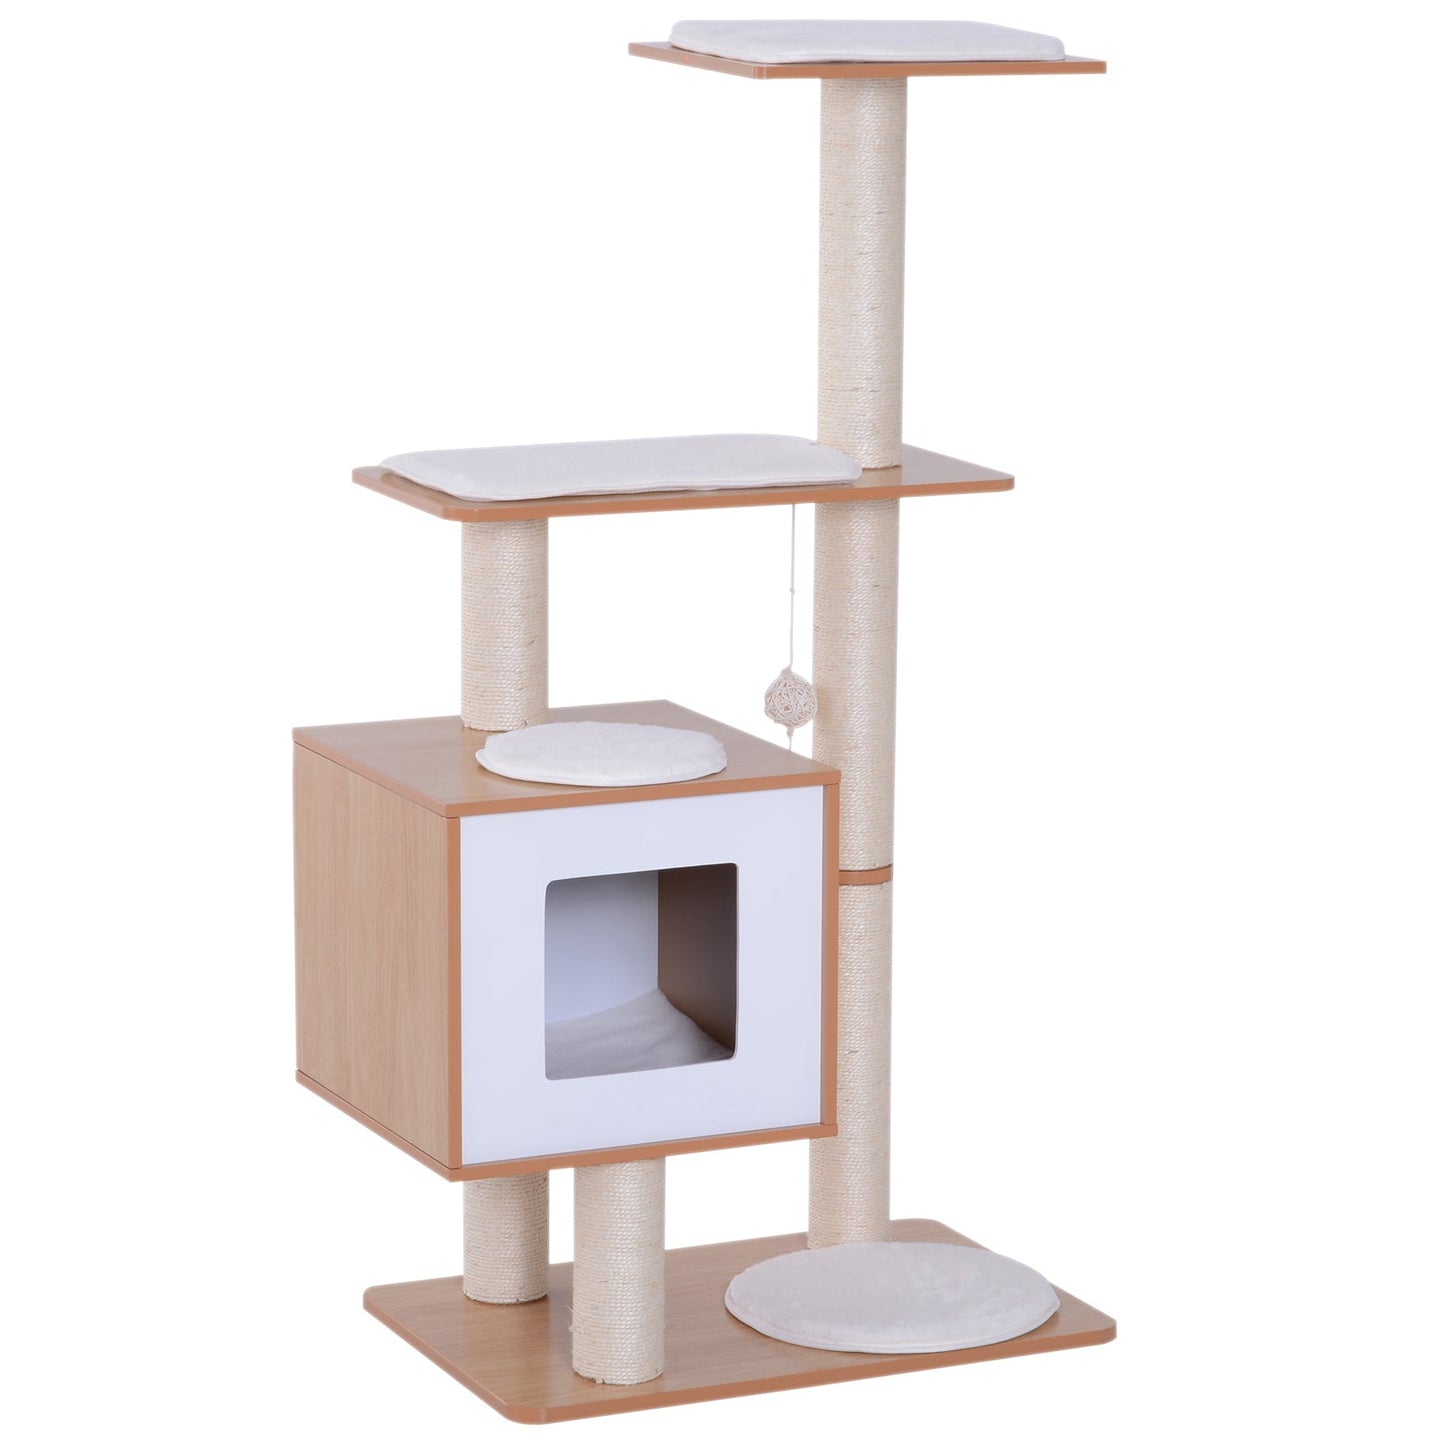 47" Wood Cat Tree, Kitty Scratching Post, Kitten House, Condo Activity Center w/ Cushions, Pet Furniture at Gallery Canada